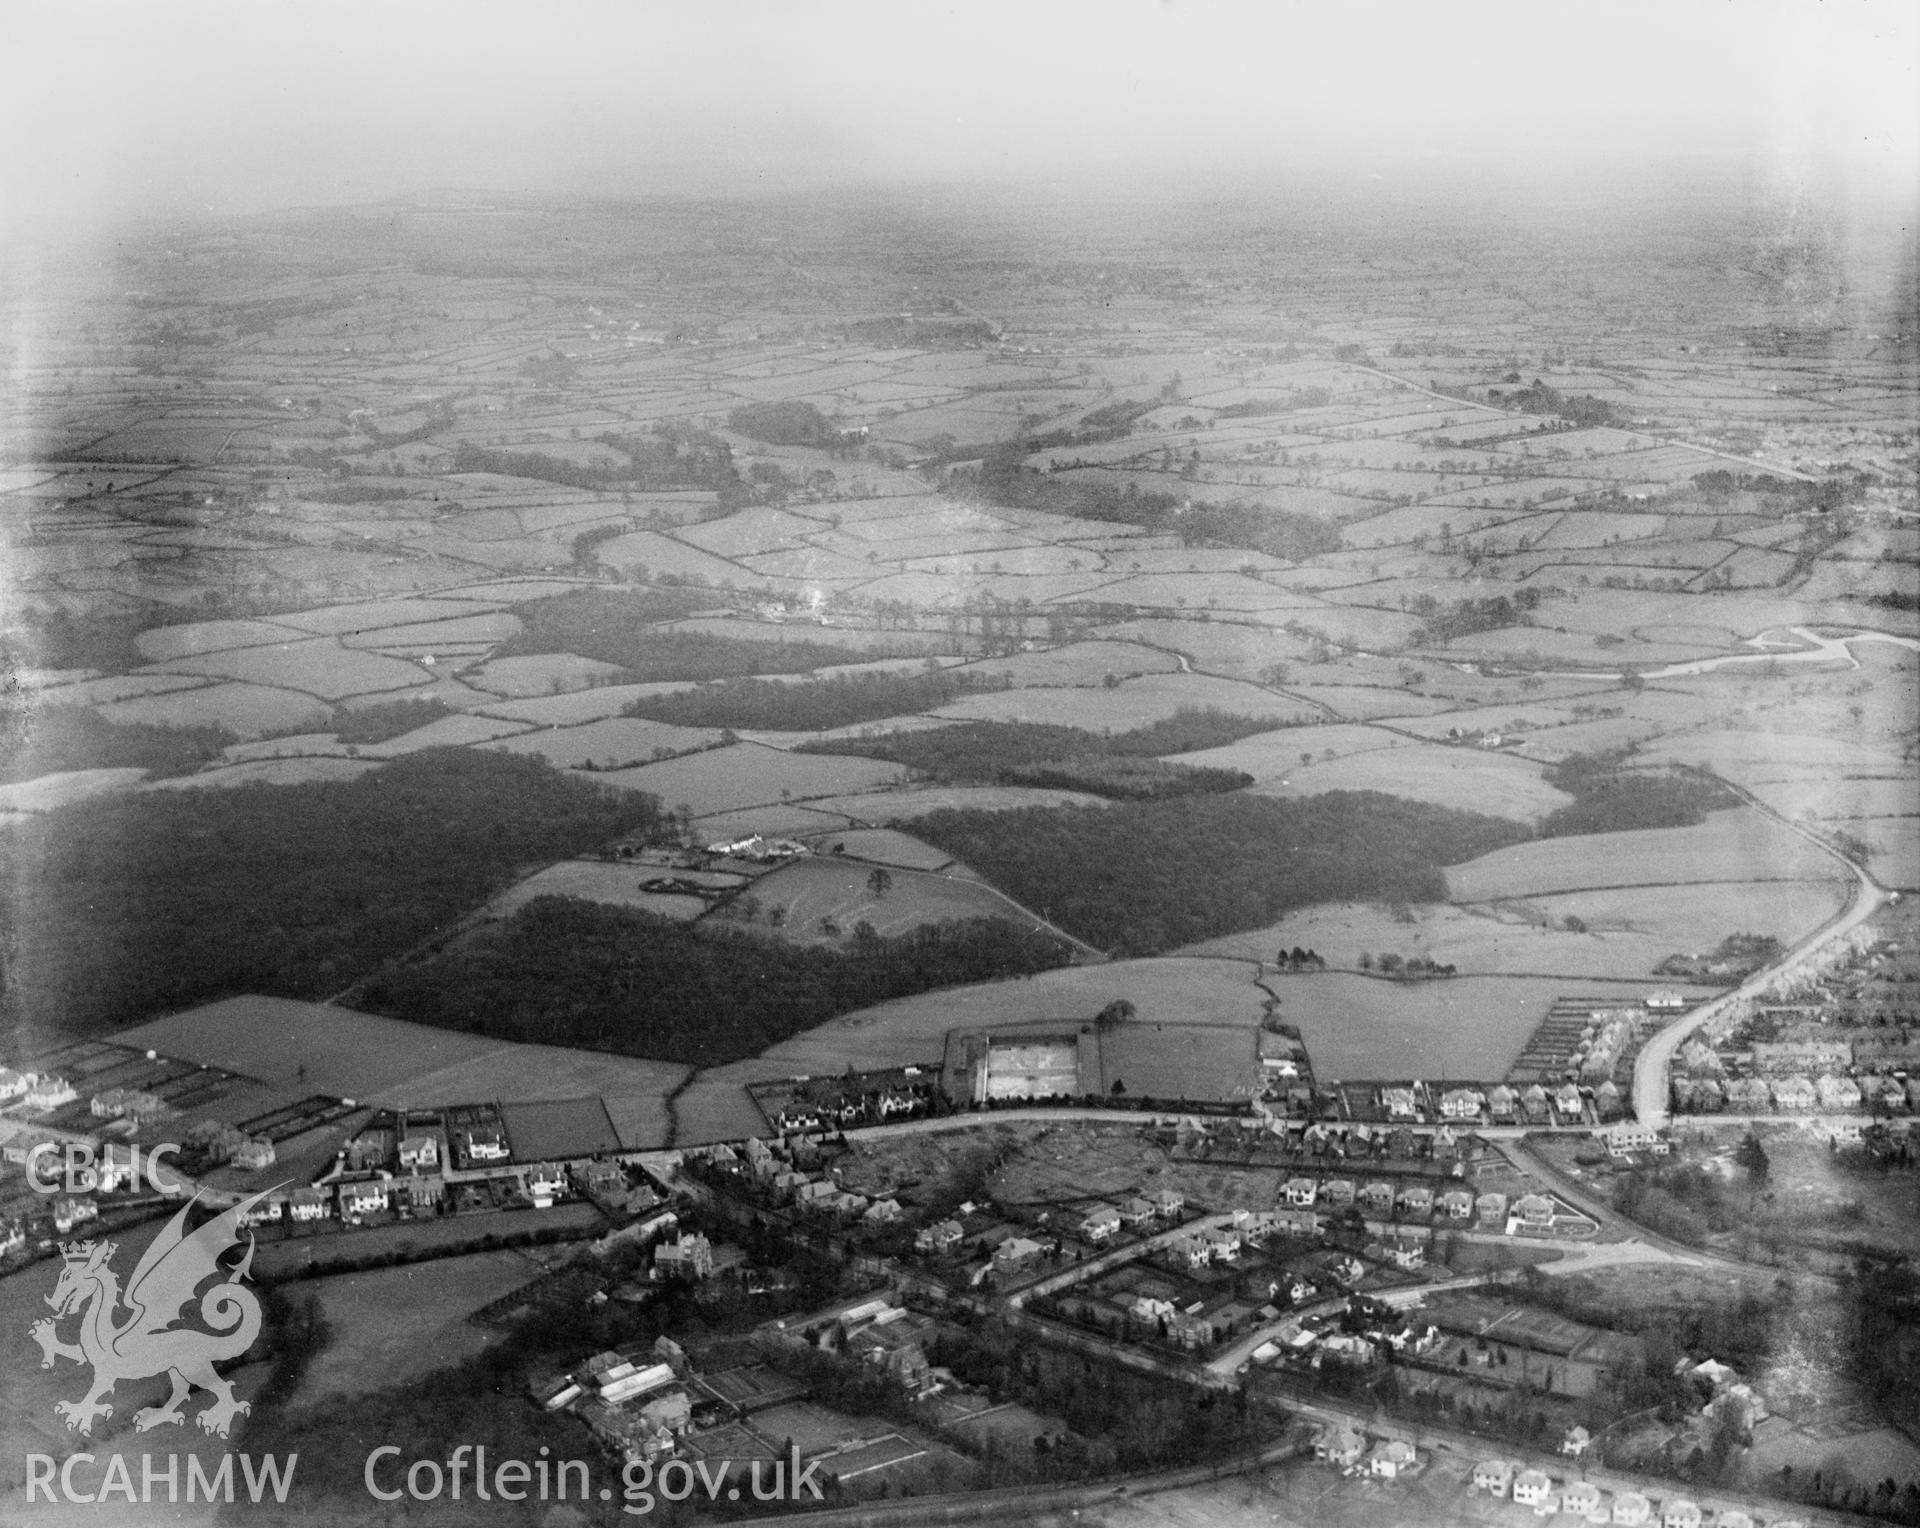 View of Cardiff showing view of Rumney, oblique aerial view. 5?x4? black and white glass plate negative.